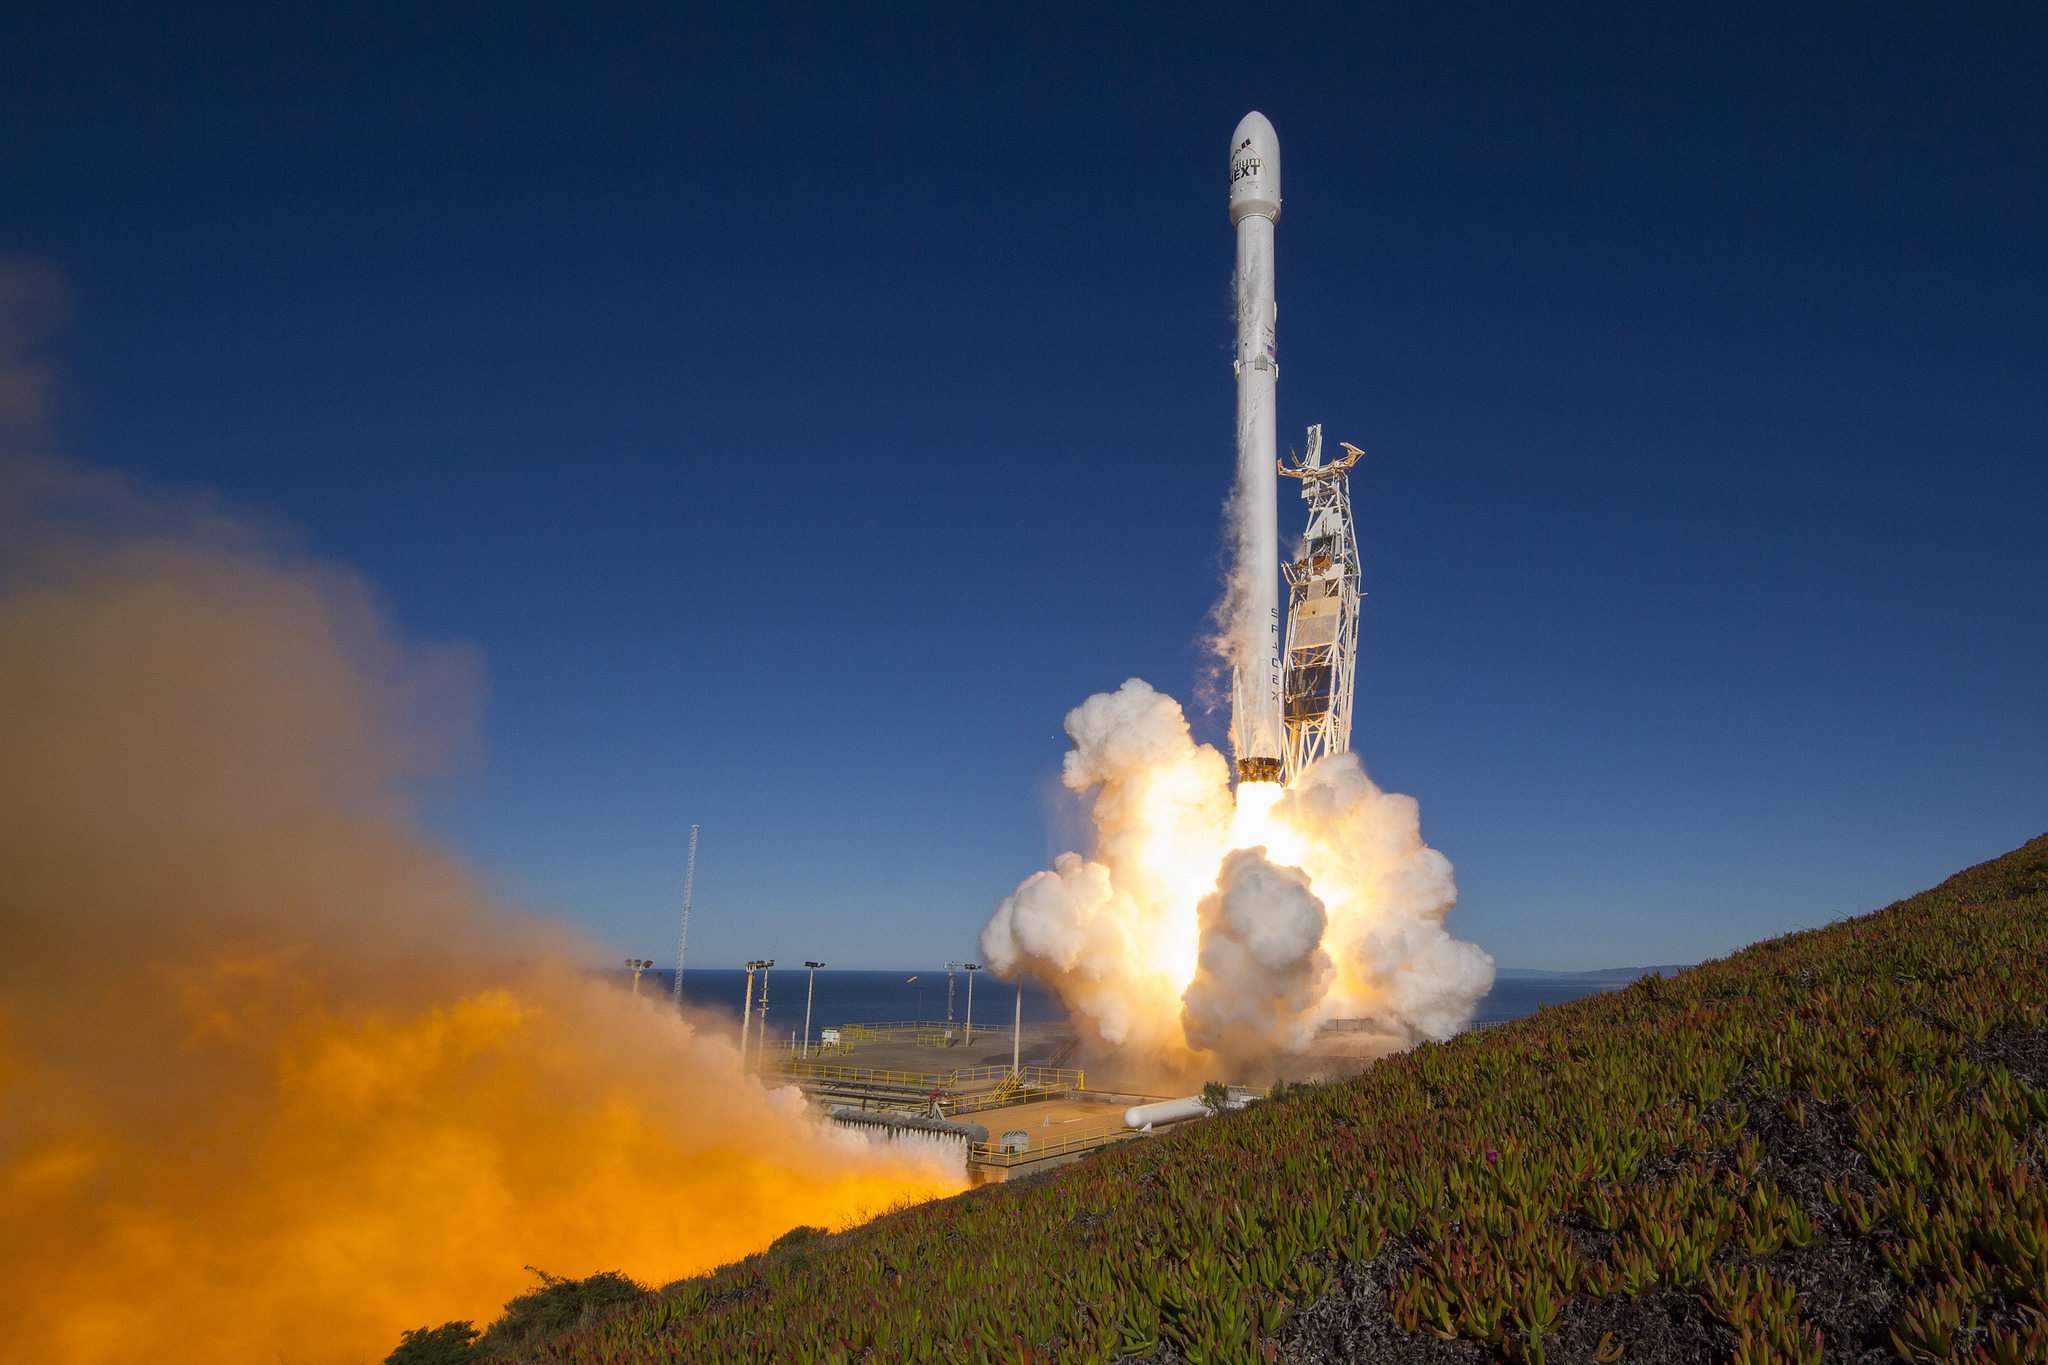 A SpaceX Falcon 9 rocket. Photo courtesy of SpaceX.